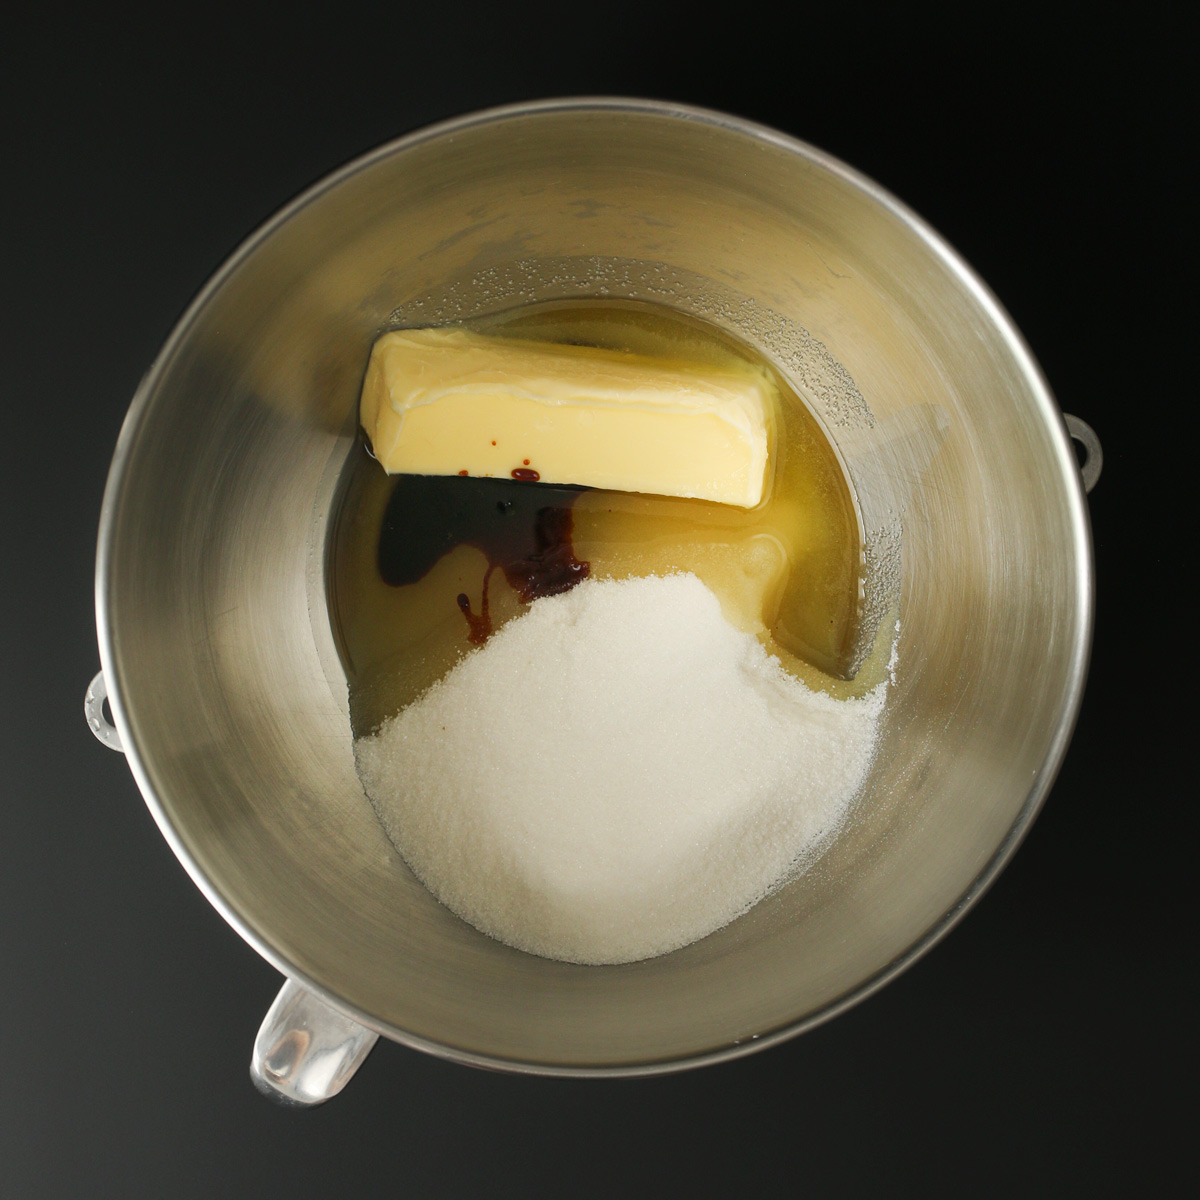 butter, oil, sugar, and molasses in mixing bowl.